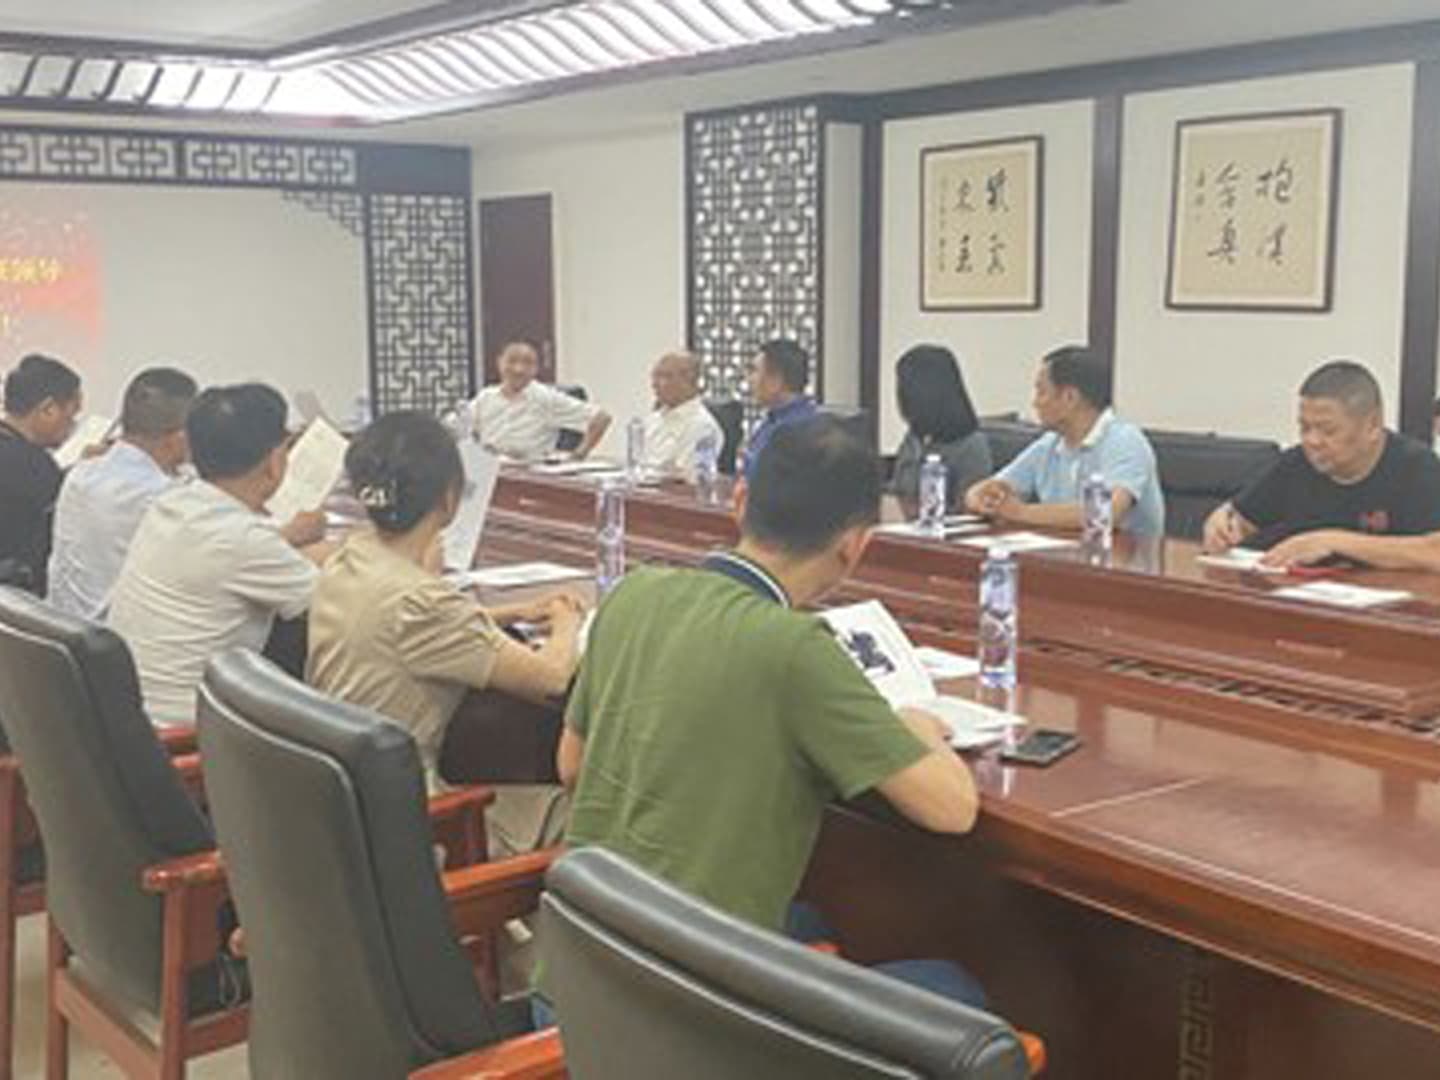 Warmly welcome the leaders of Bengbu City Federation of Industry and Commerce to visit and guide the inspection